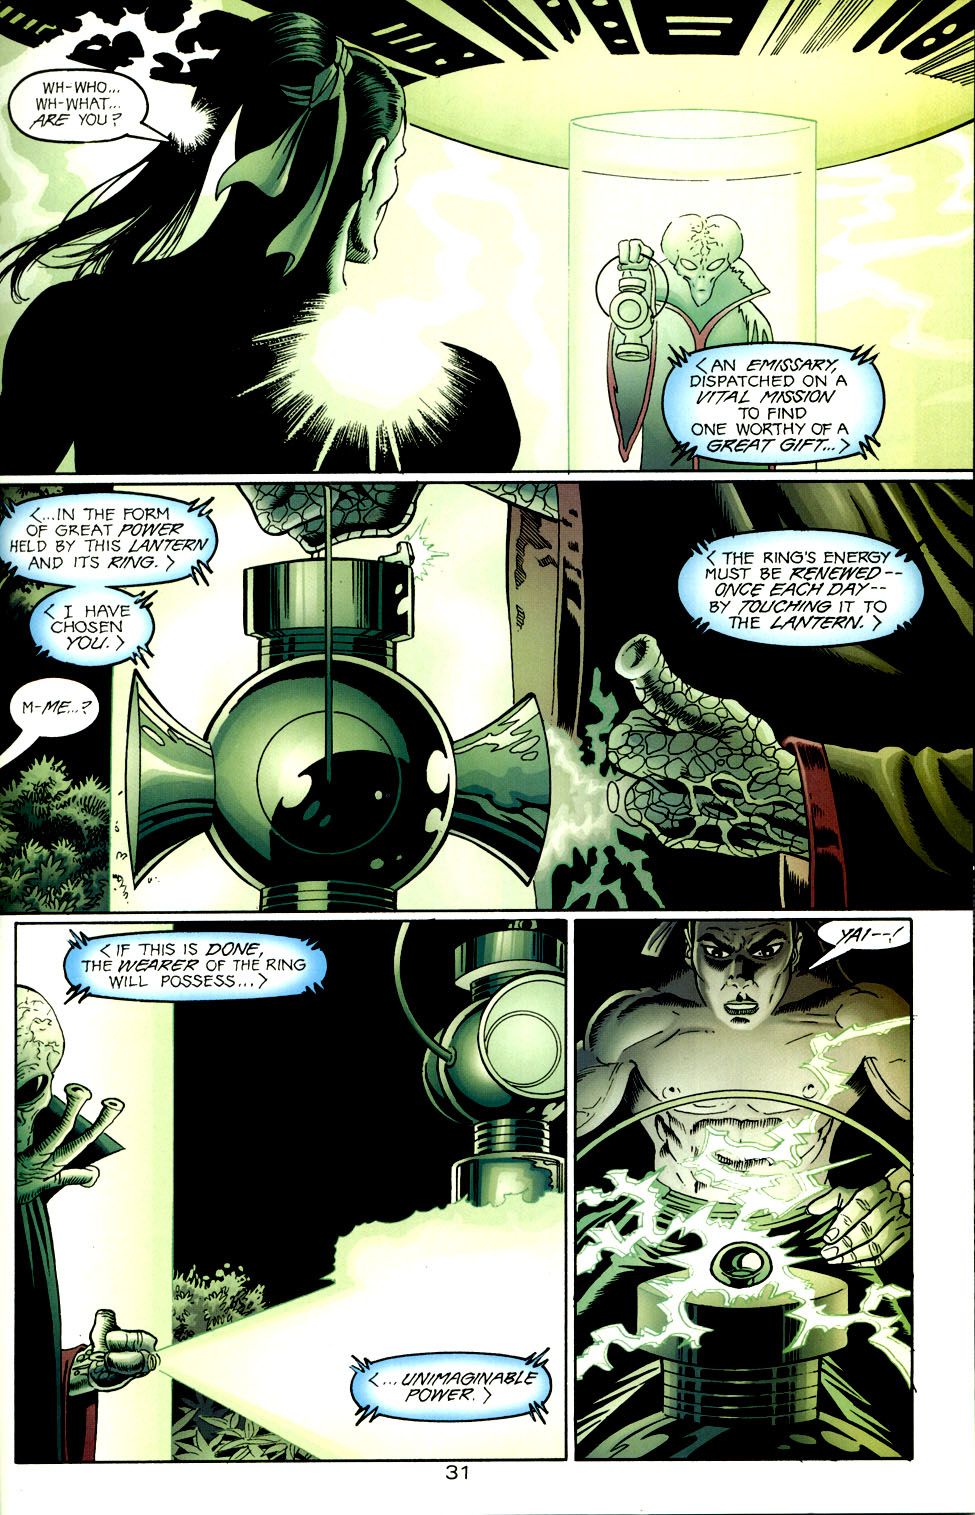 Who Were the Green Lanterns of Sector 2814 Before Abin Sur